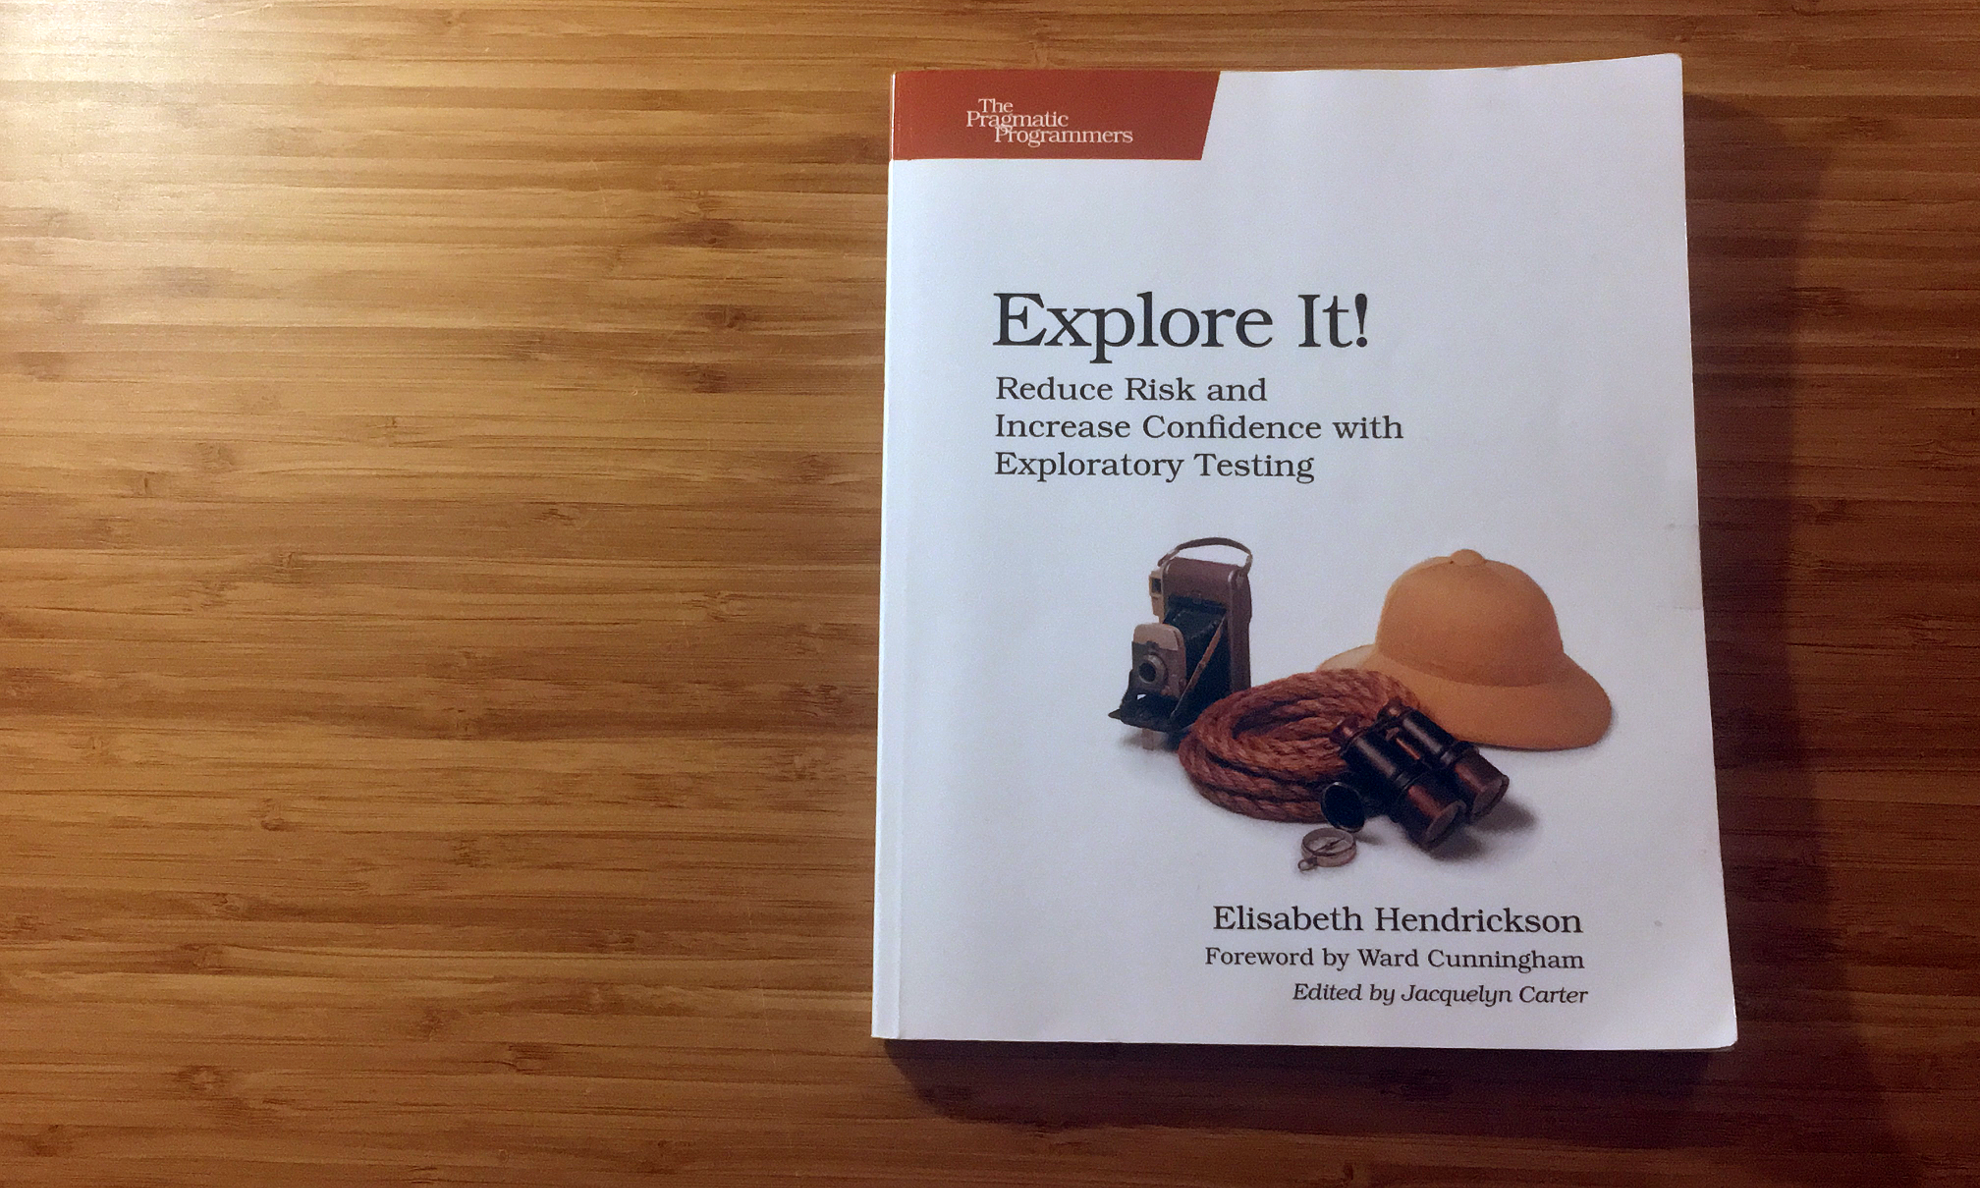 Explore It! Reduce Risk and Increase Confidence with Exploratory Testing, written by Elisabeth Hendrickson, published by The Pragmatic Programmers